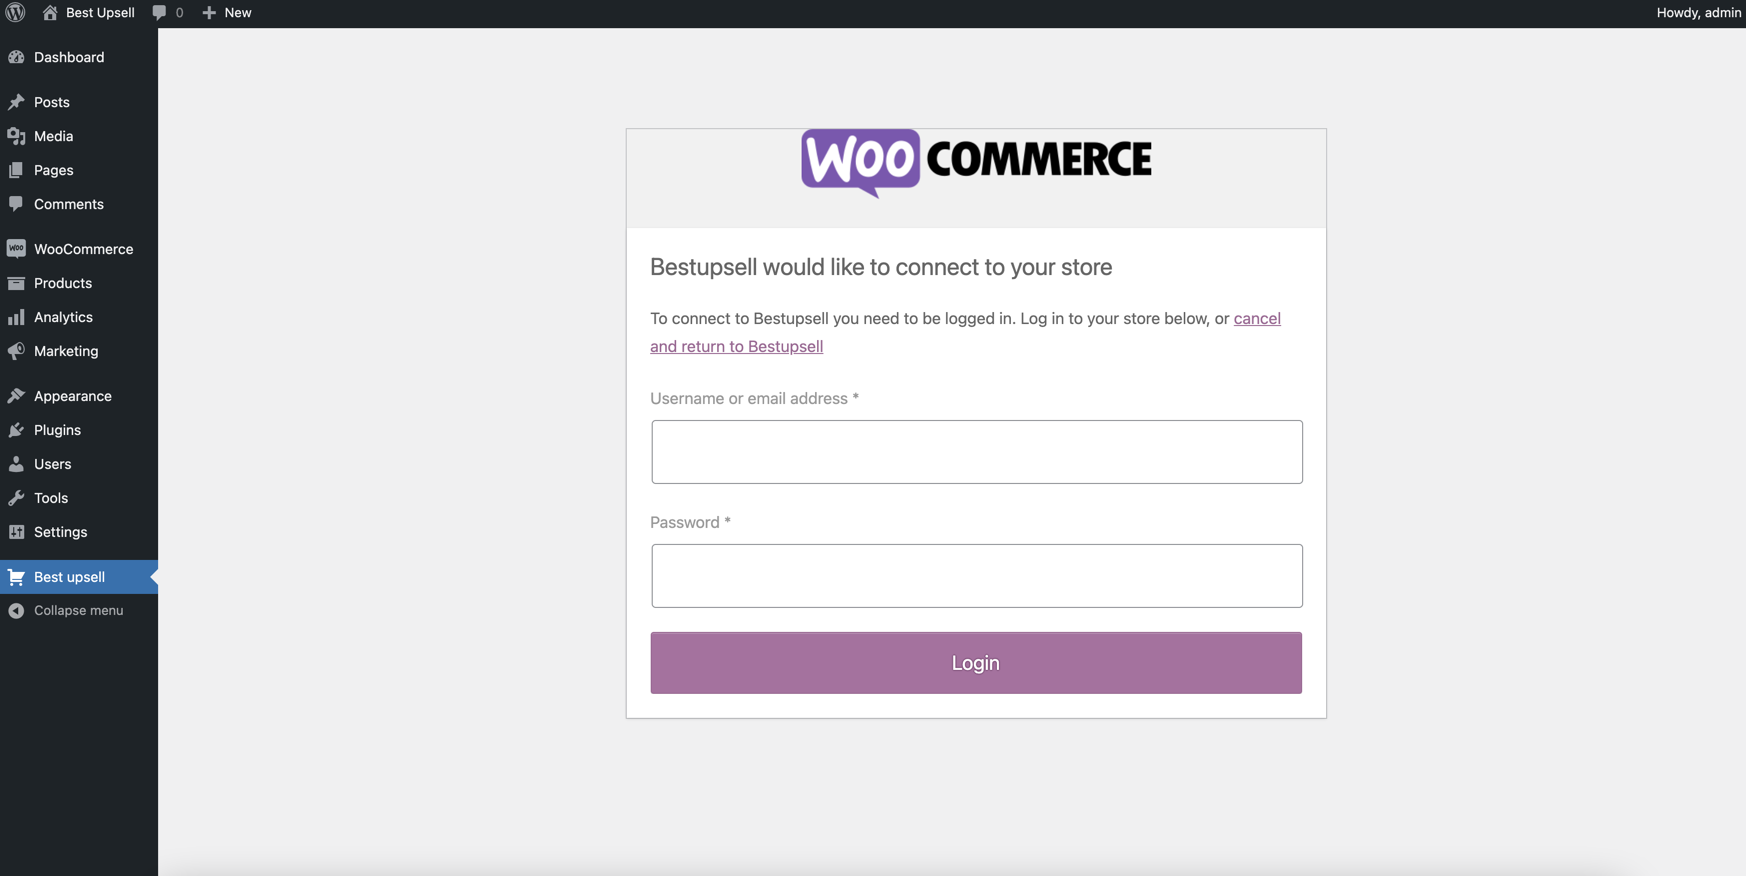 woocommerce permission for best upsell